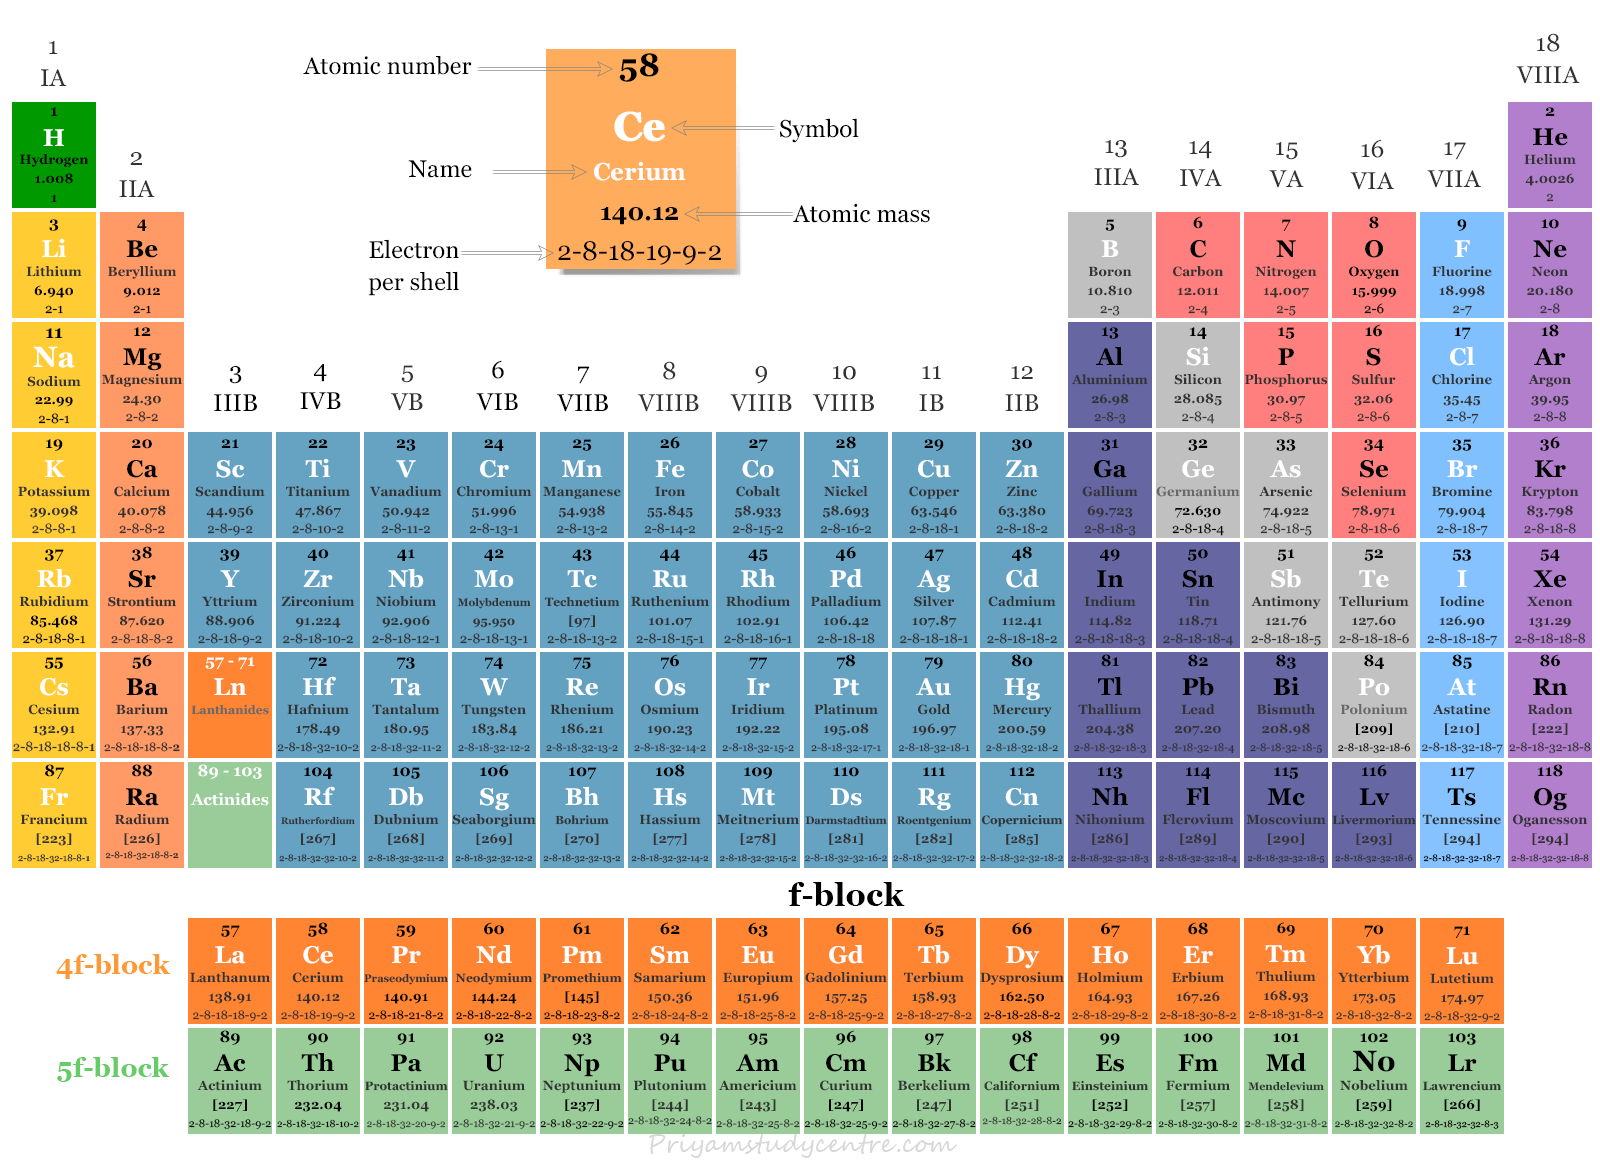 f block elements in periodic table, name, symbol, and atomic number of 4f and 5f block chemical elements